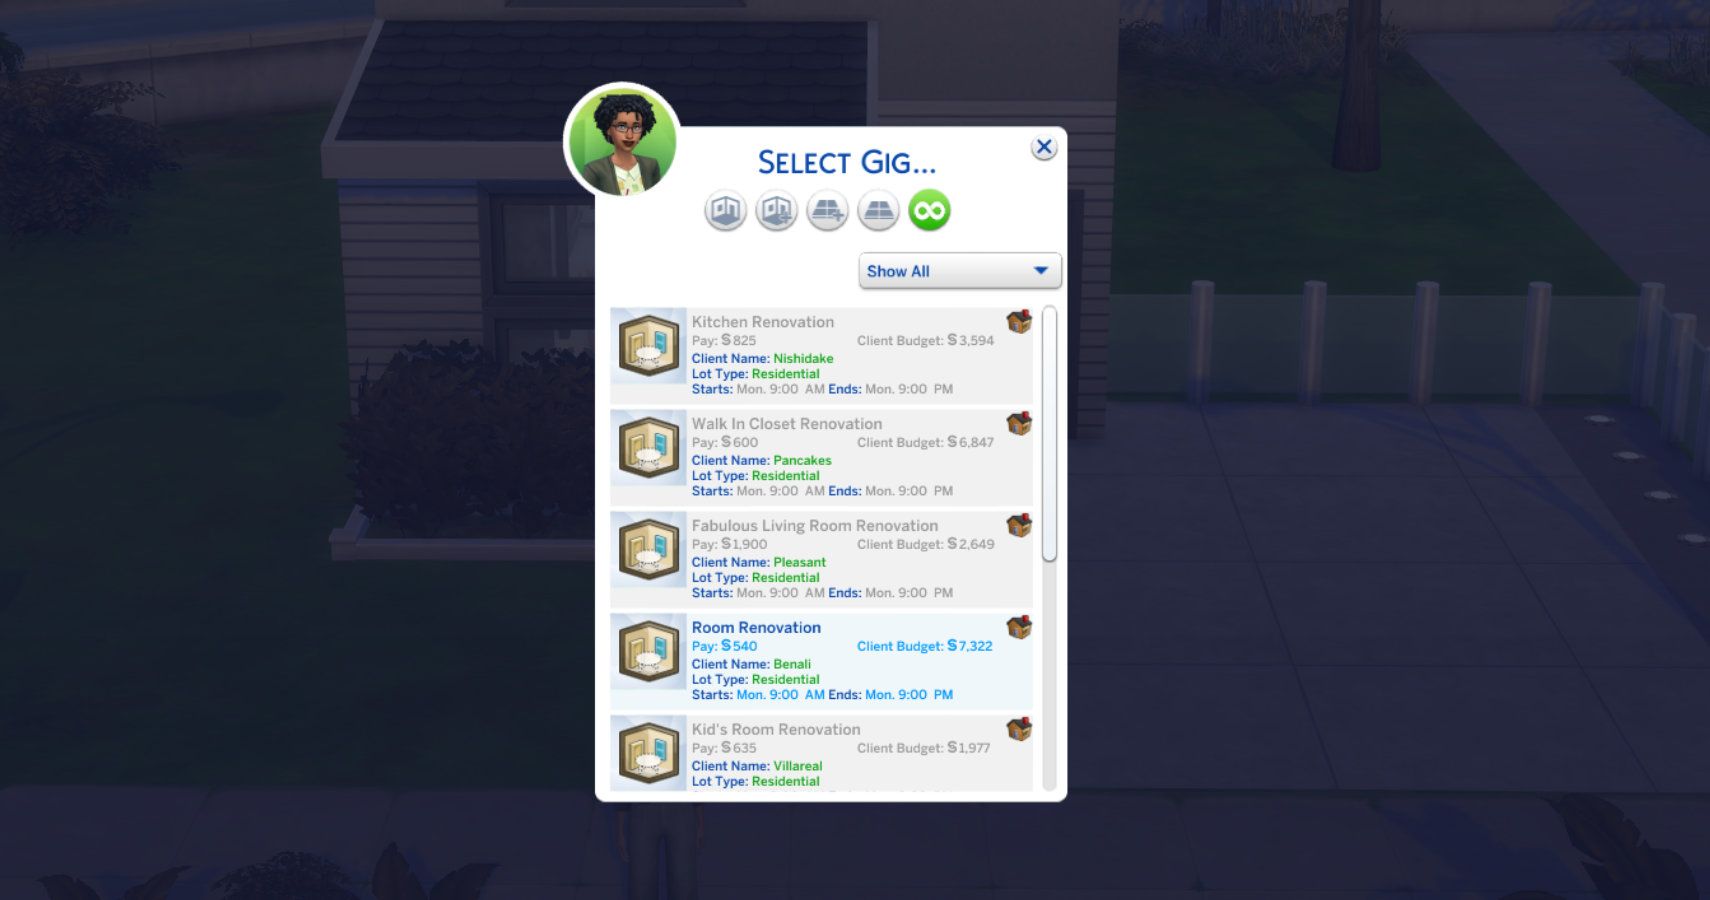 The Sims 4 Interior Decorator Career Guide